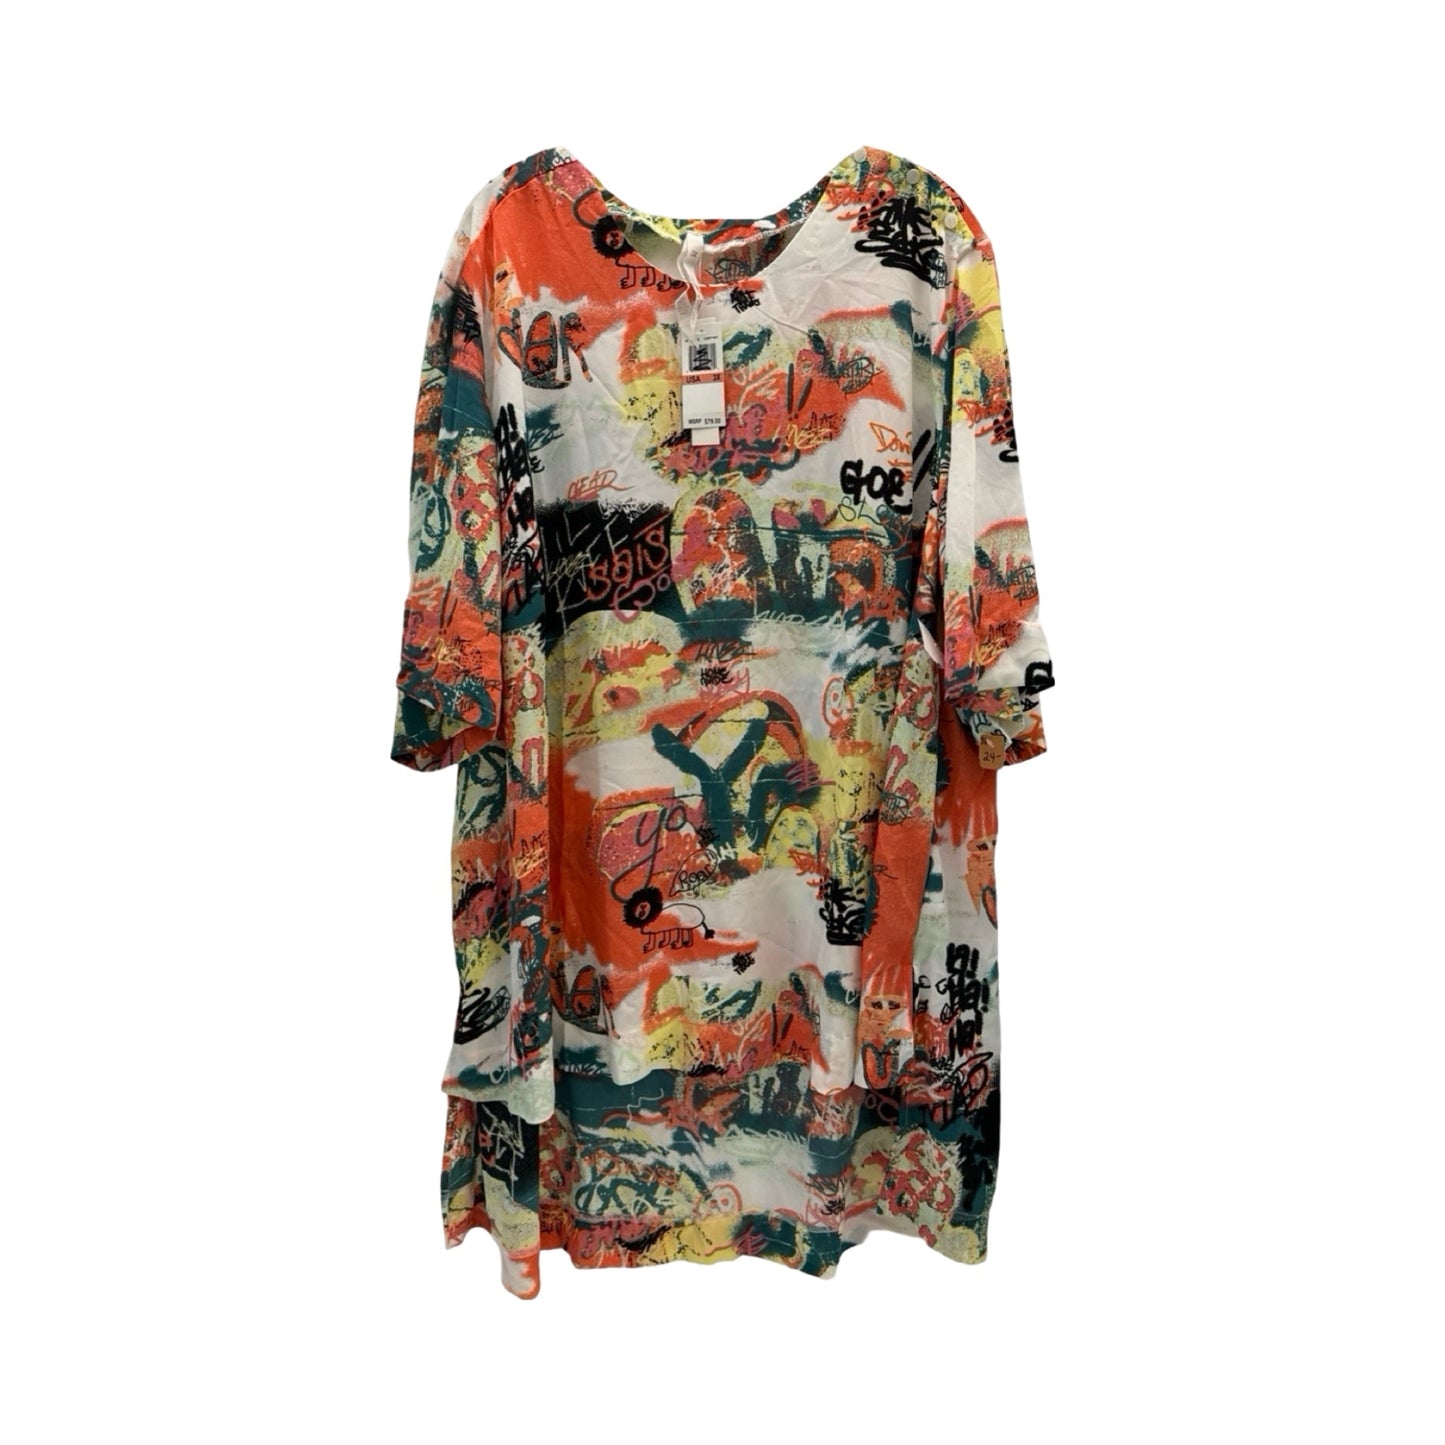 Multi-colored Blouse Short Sleeve Melissa Mccarthy, Size 3x